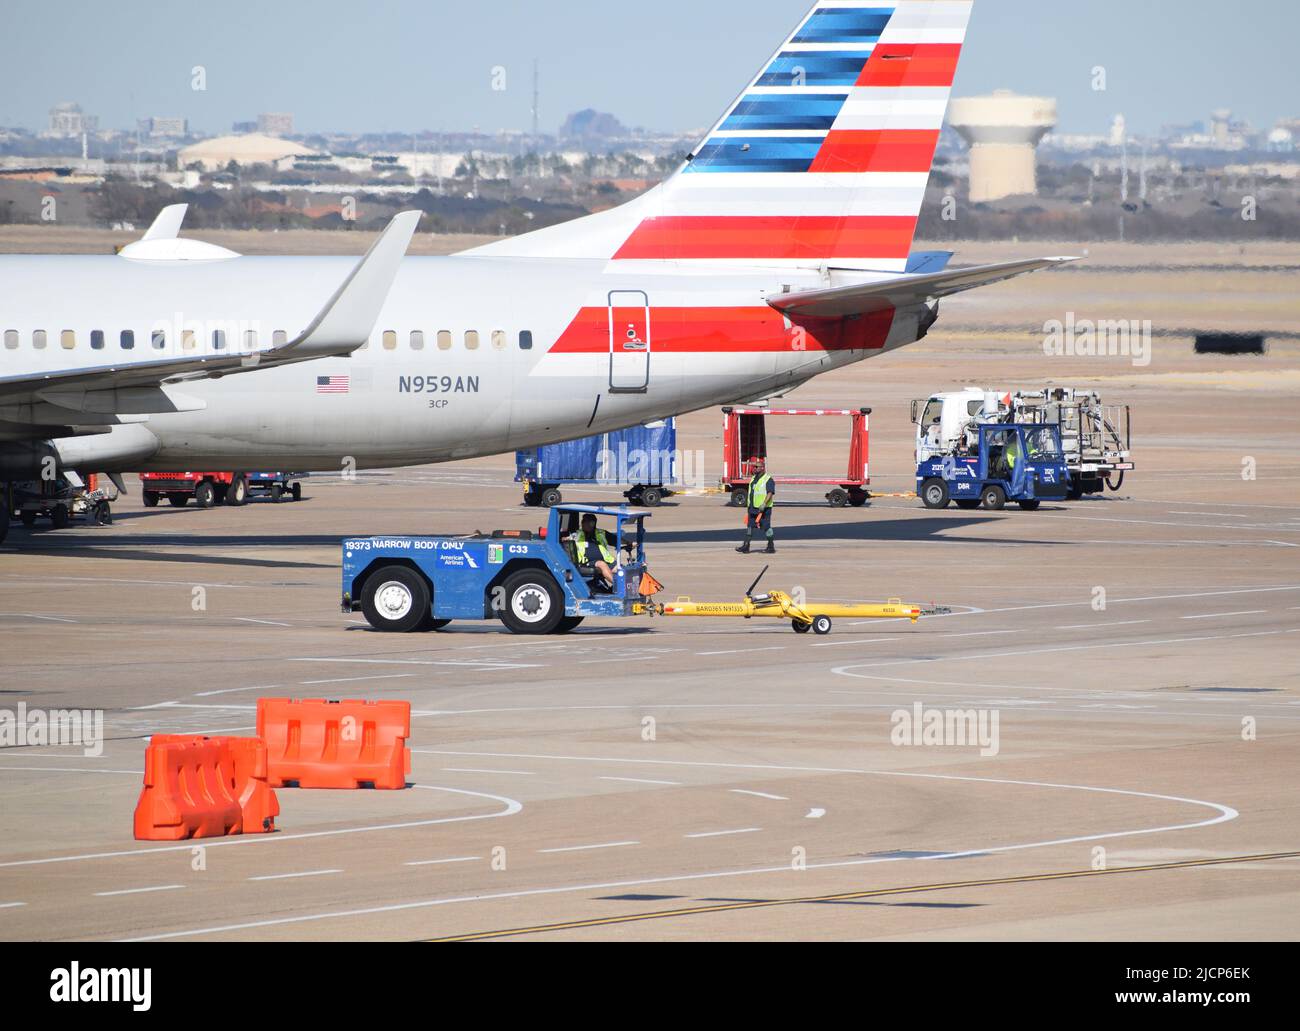 An American Airlines plane being serviced by ramp service agents outside of a terminal at DFW Airport (Dallas-Fort Worth Airport) Stock Photo